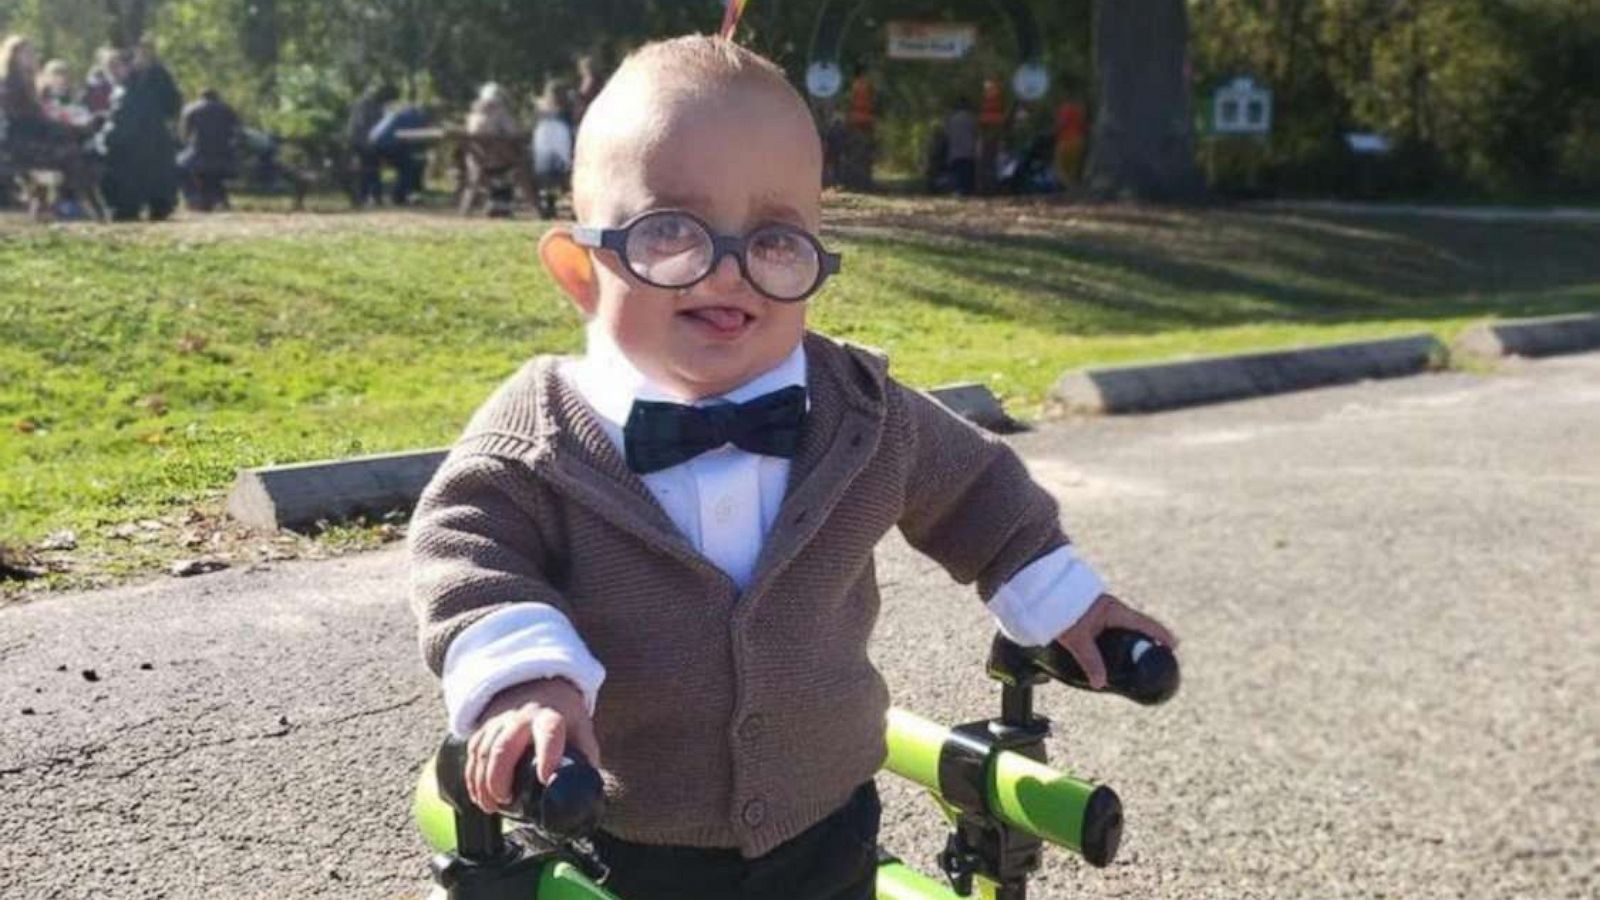 PHOTO: Brantley Morse, 2, is dressed as Carl from the Pixar film, "Up," at a fall festival in Ohio, October 2019.